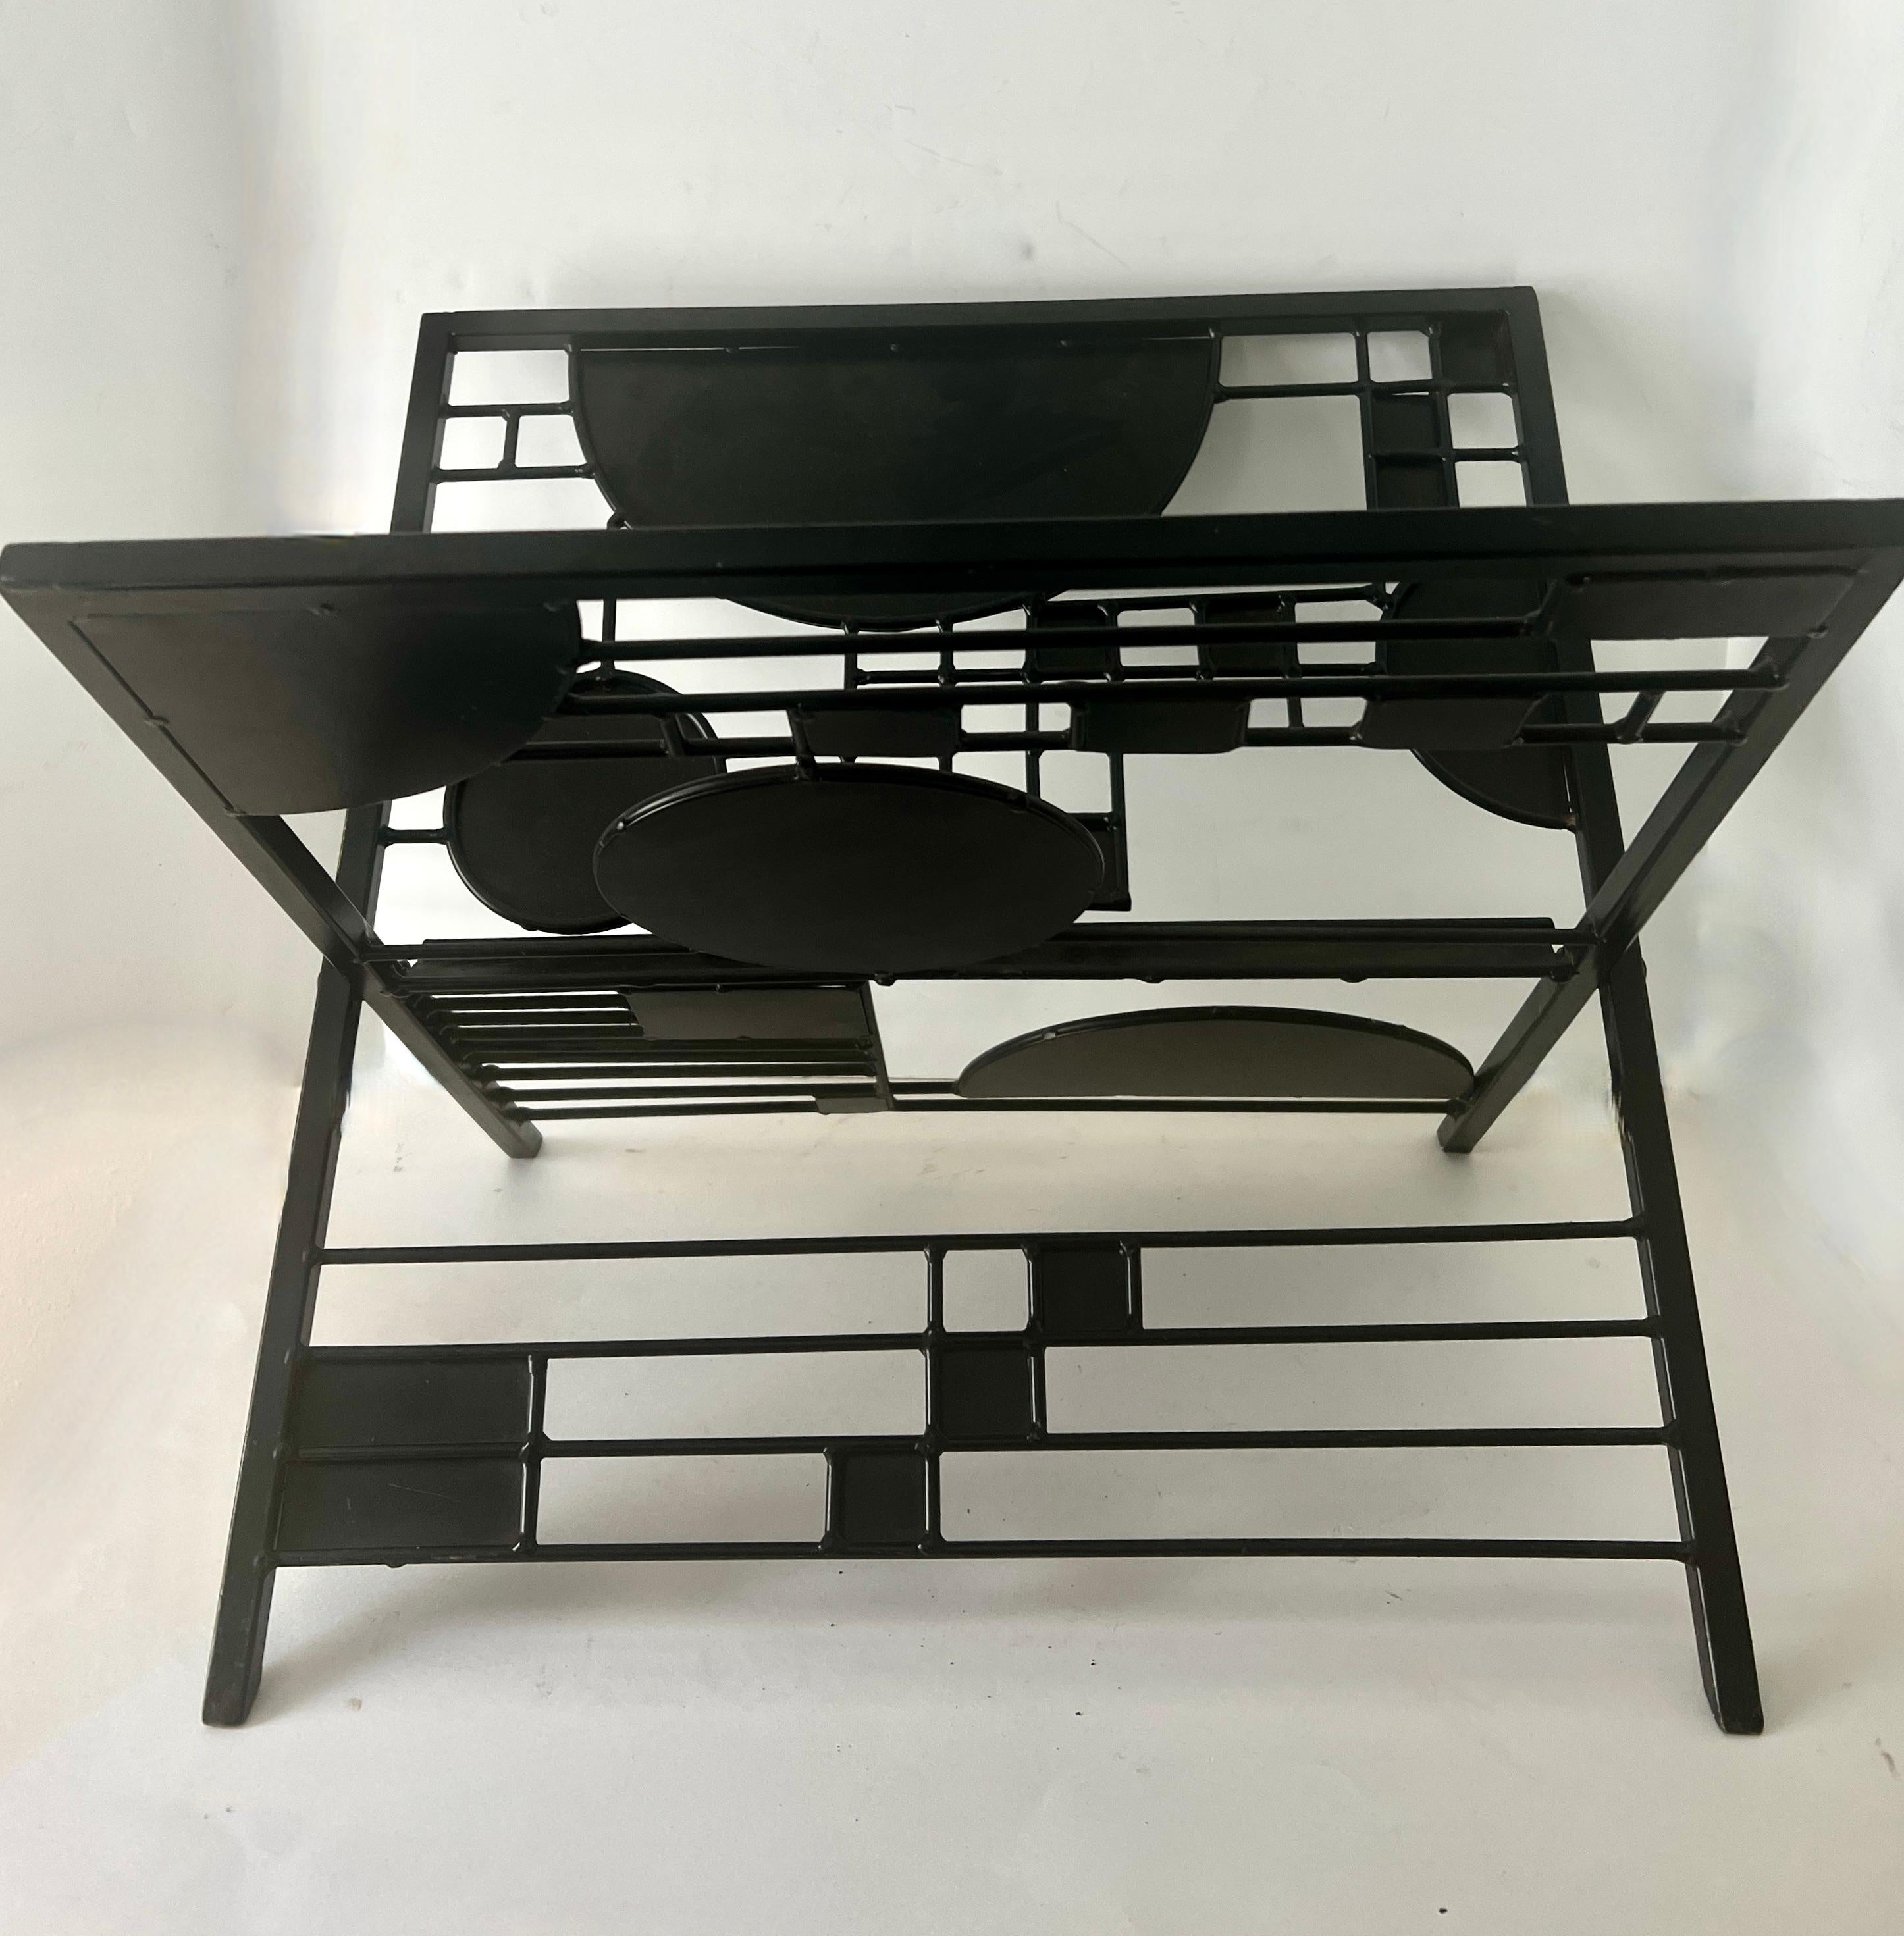 A unique and well designed metal magazine rack by Iconic Architect Frank Lloyd Wright.  The rack is indicative of the Arts and Crafts Style which Wright is know for.  A Mid-Century jewel.  

The metal is painted black and is in wonderful vintage